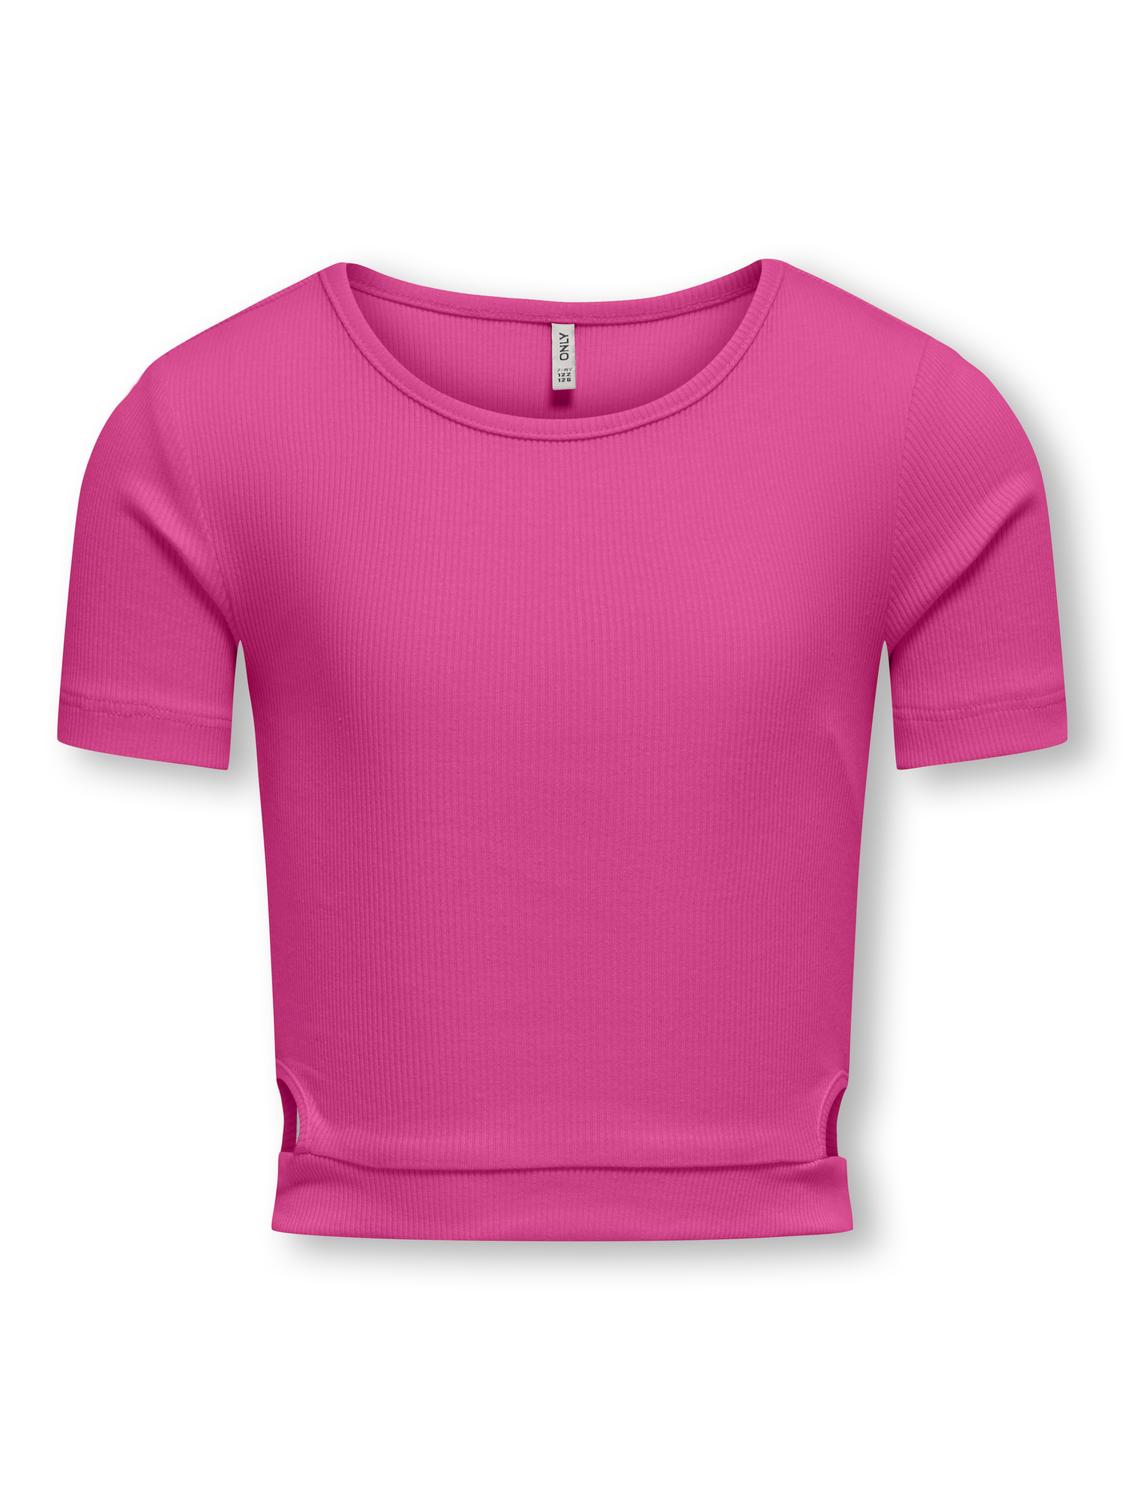 ONLY Tight fit O-hals Top -Raspberry Rose - 15313690